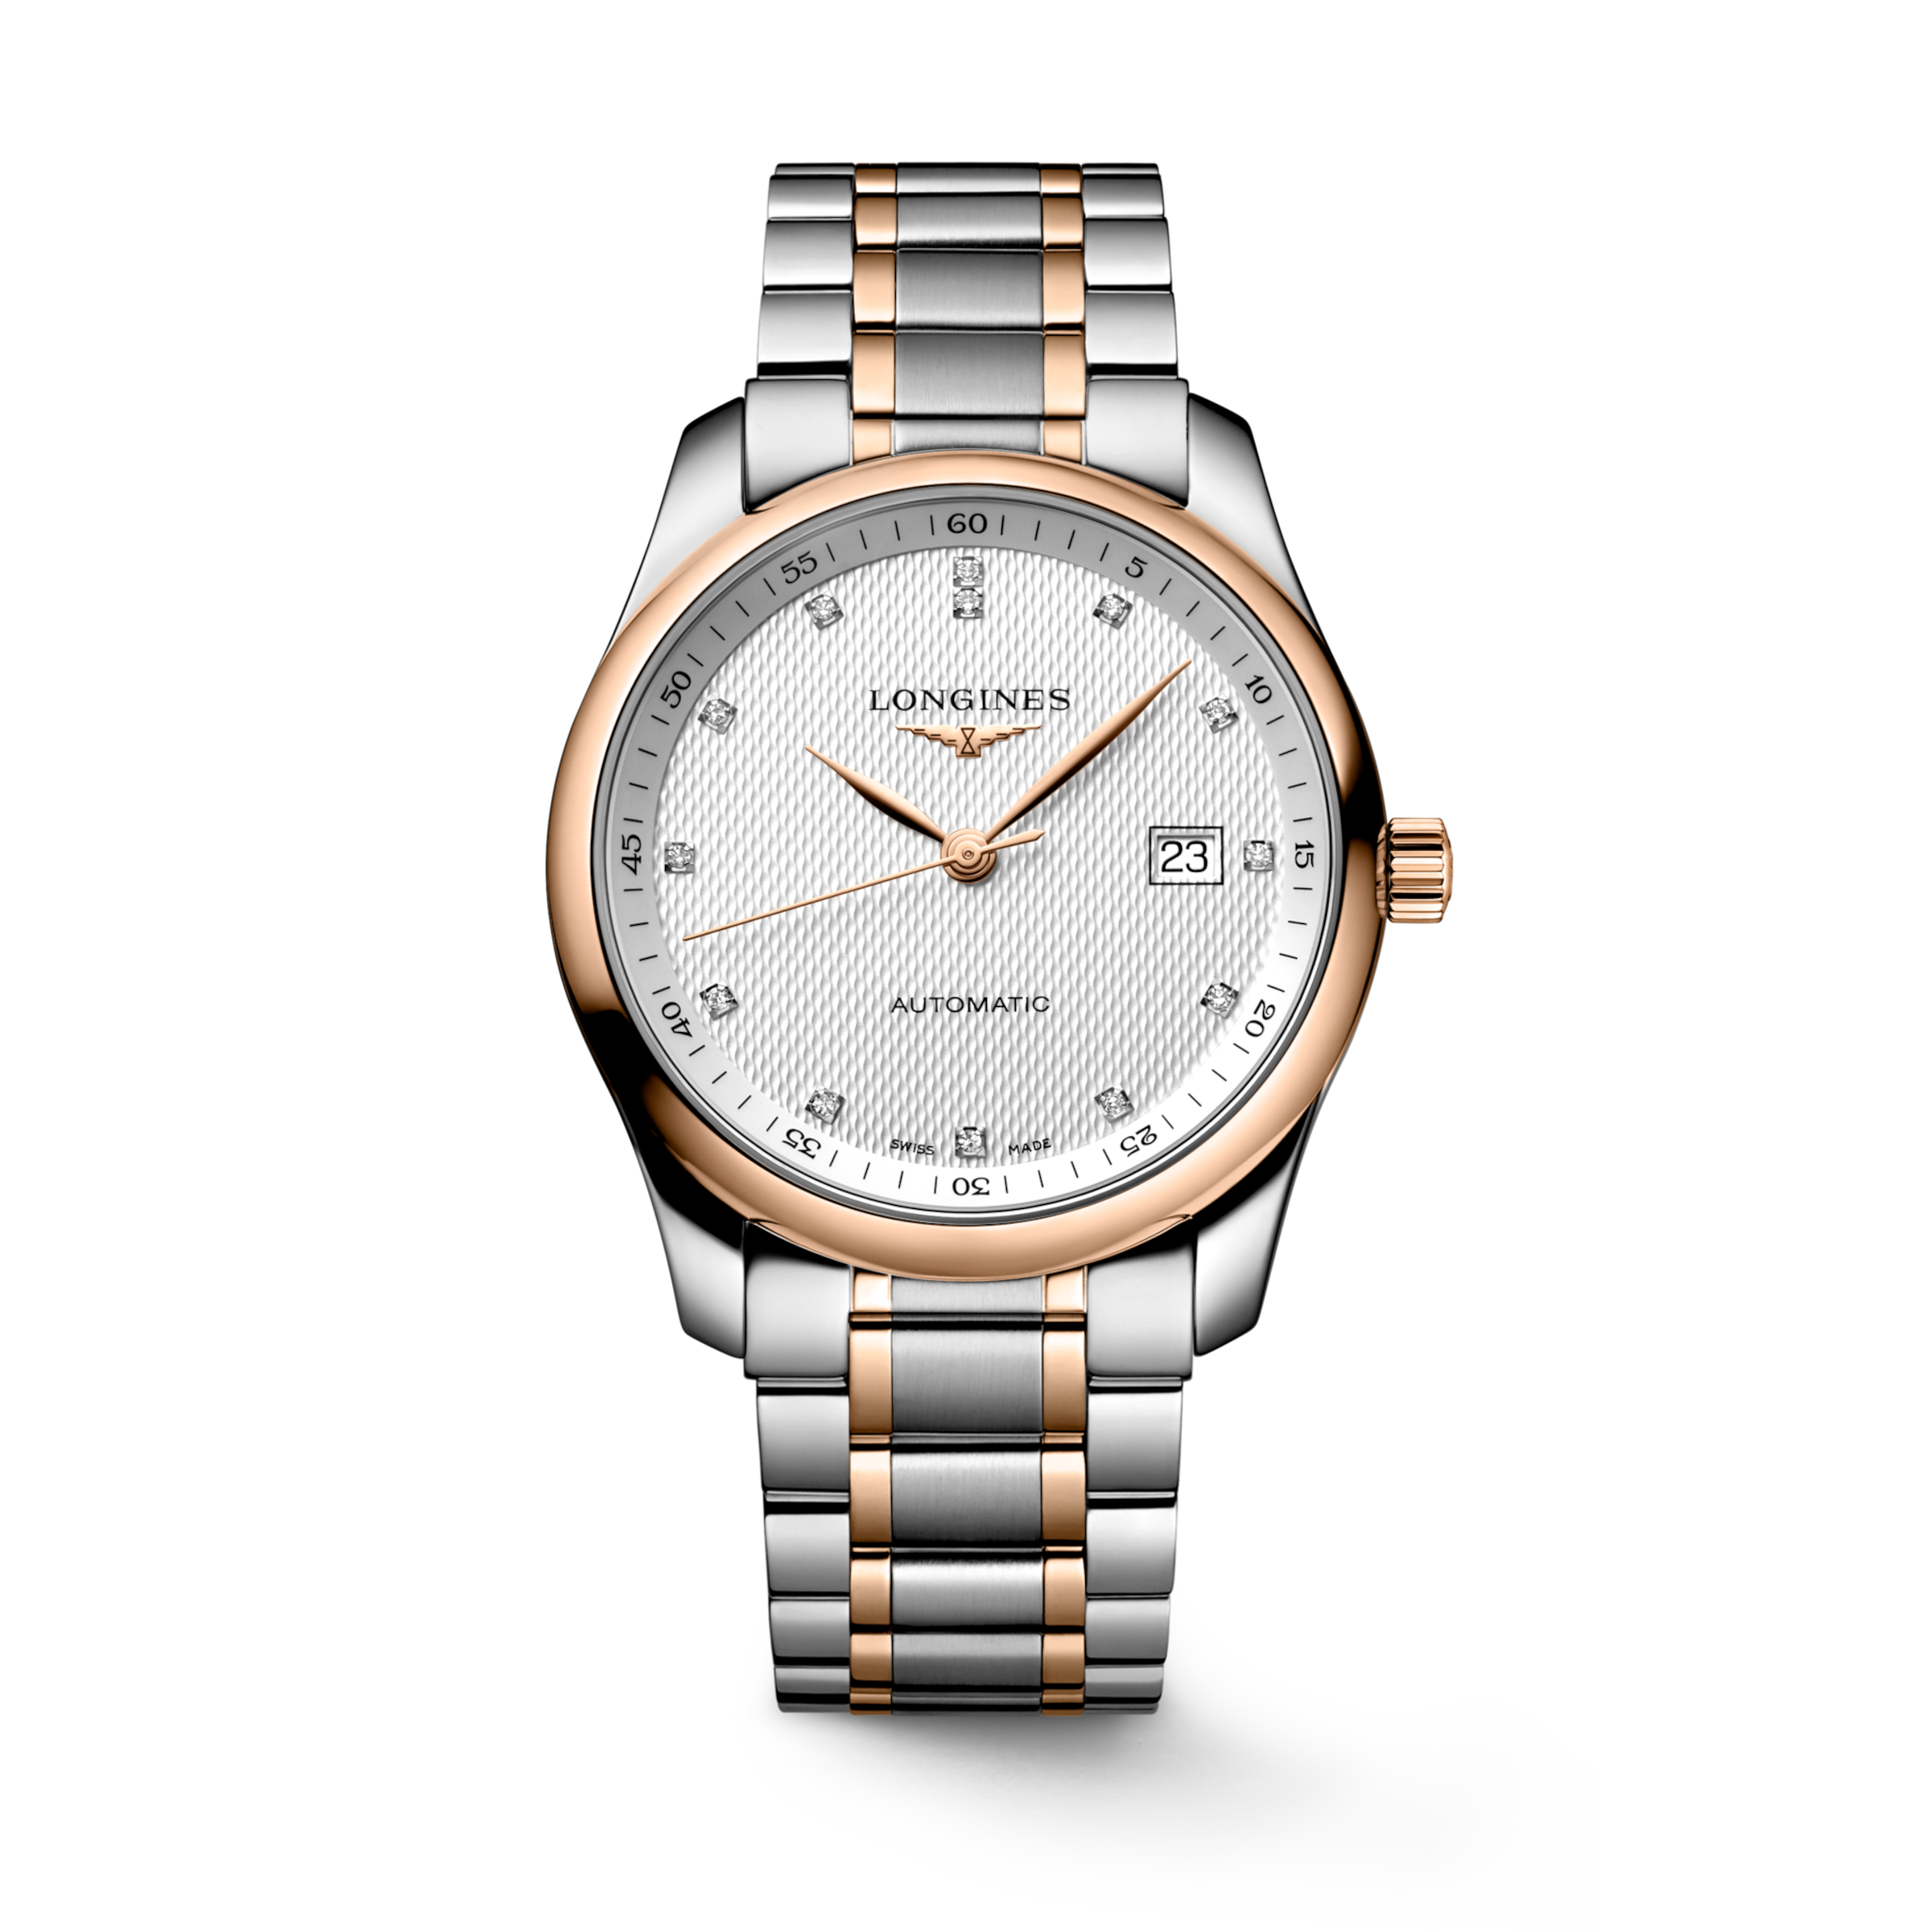 Longines MASTER COLLECTION Automatic Stainless steel and 18 karat pink gold cap 200 Watch - L2.793.5.77.7